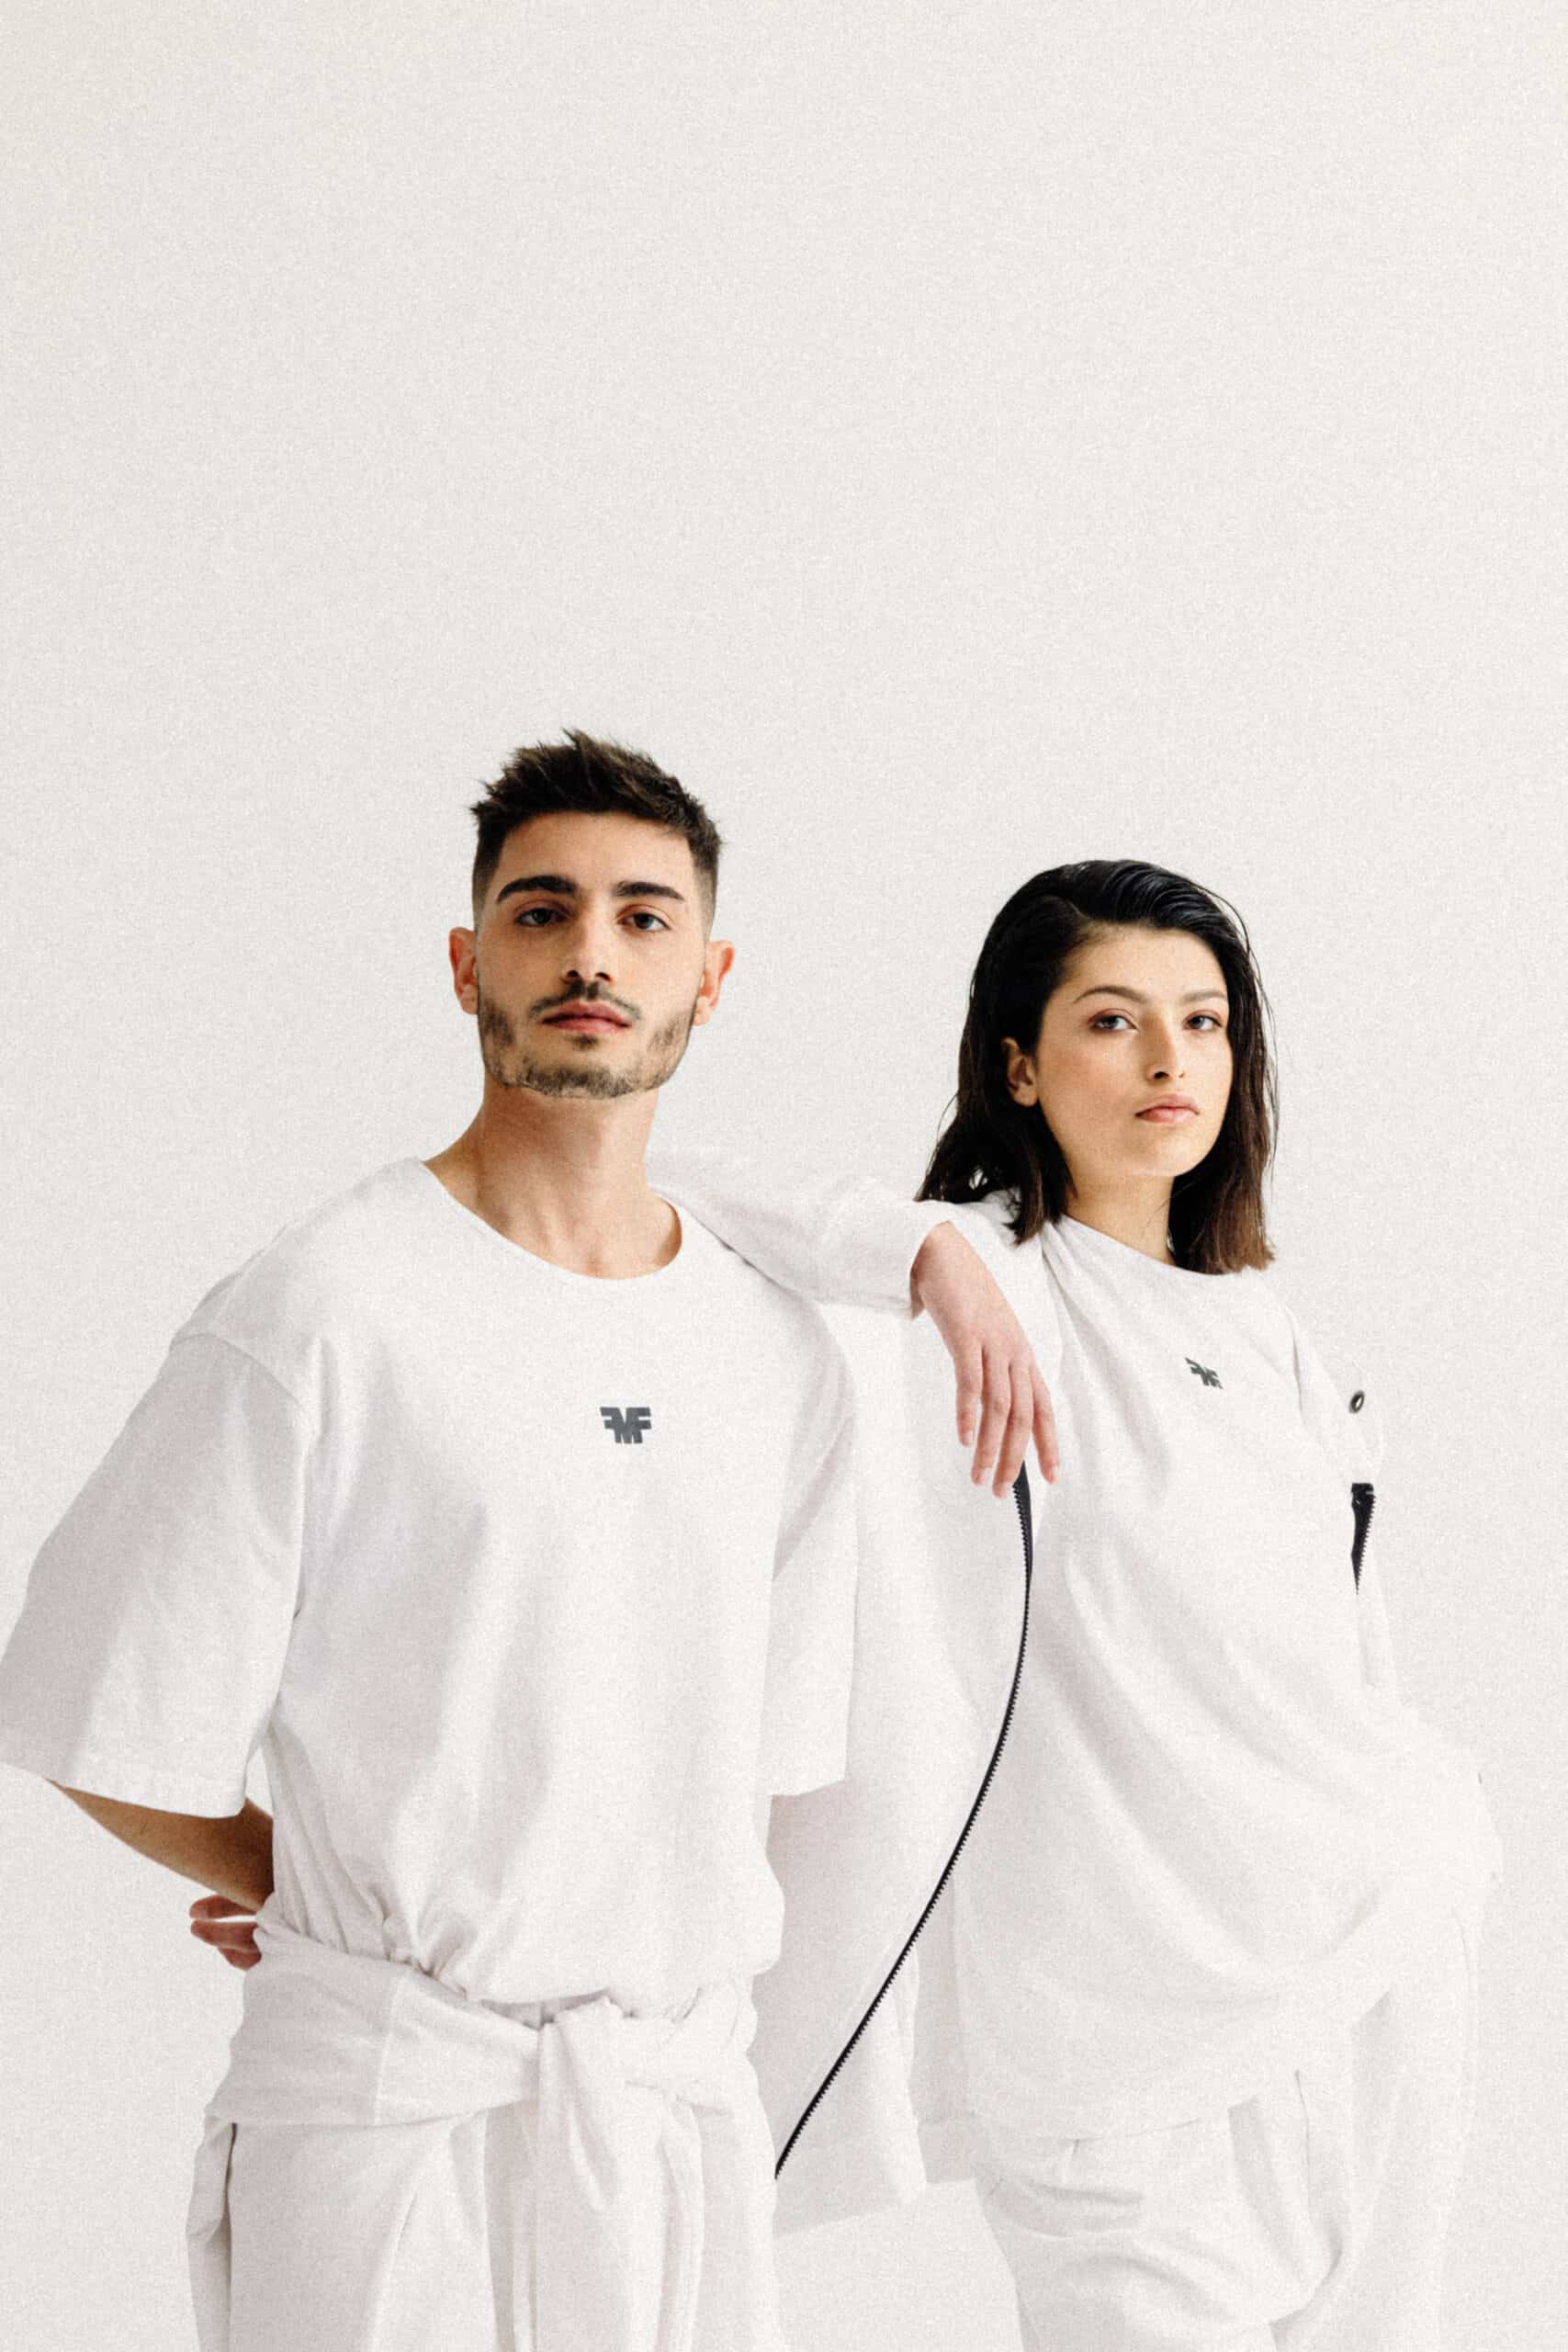 FlyManoloFly: Greek Pole Vaulter Emmanouíl Karalís Soars to New Heights with Launch of Clothing Line 59